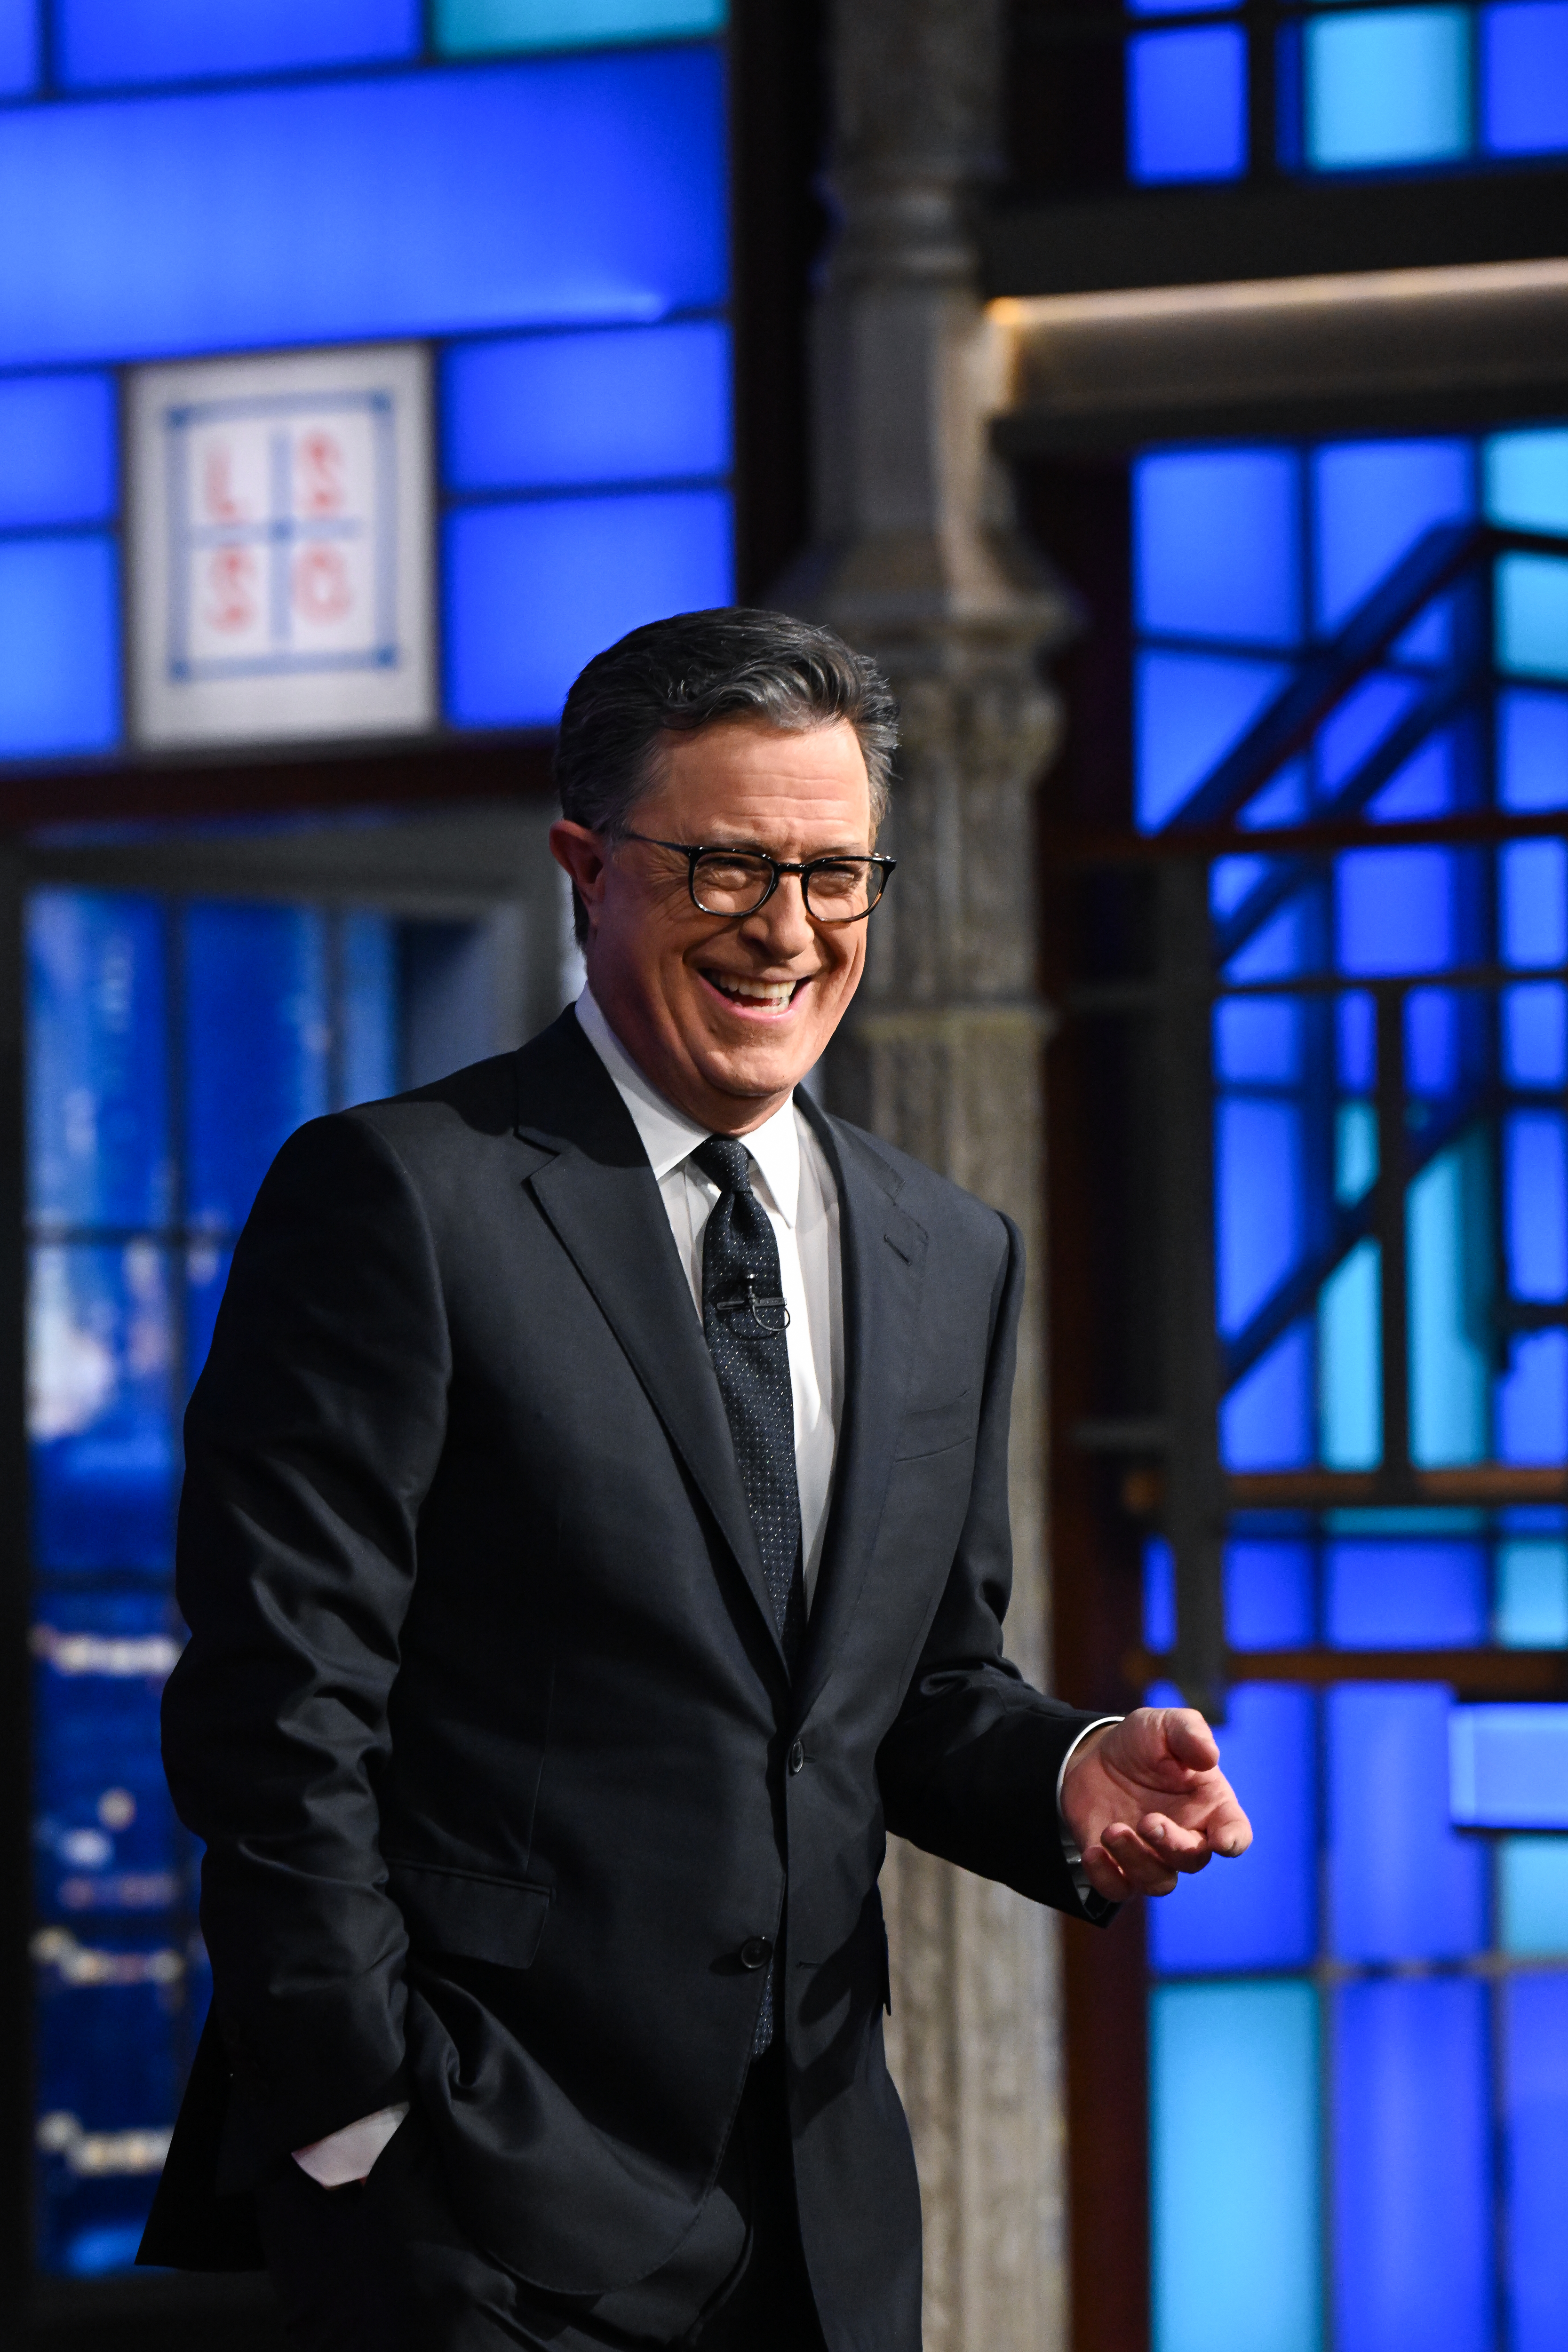 Stephen Colbert in a classic suit, hosting his late-night talk show